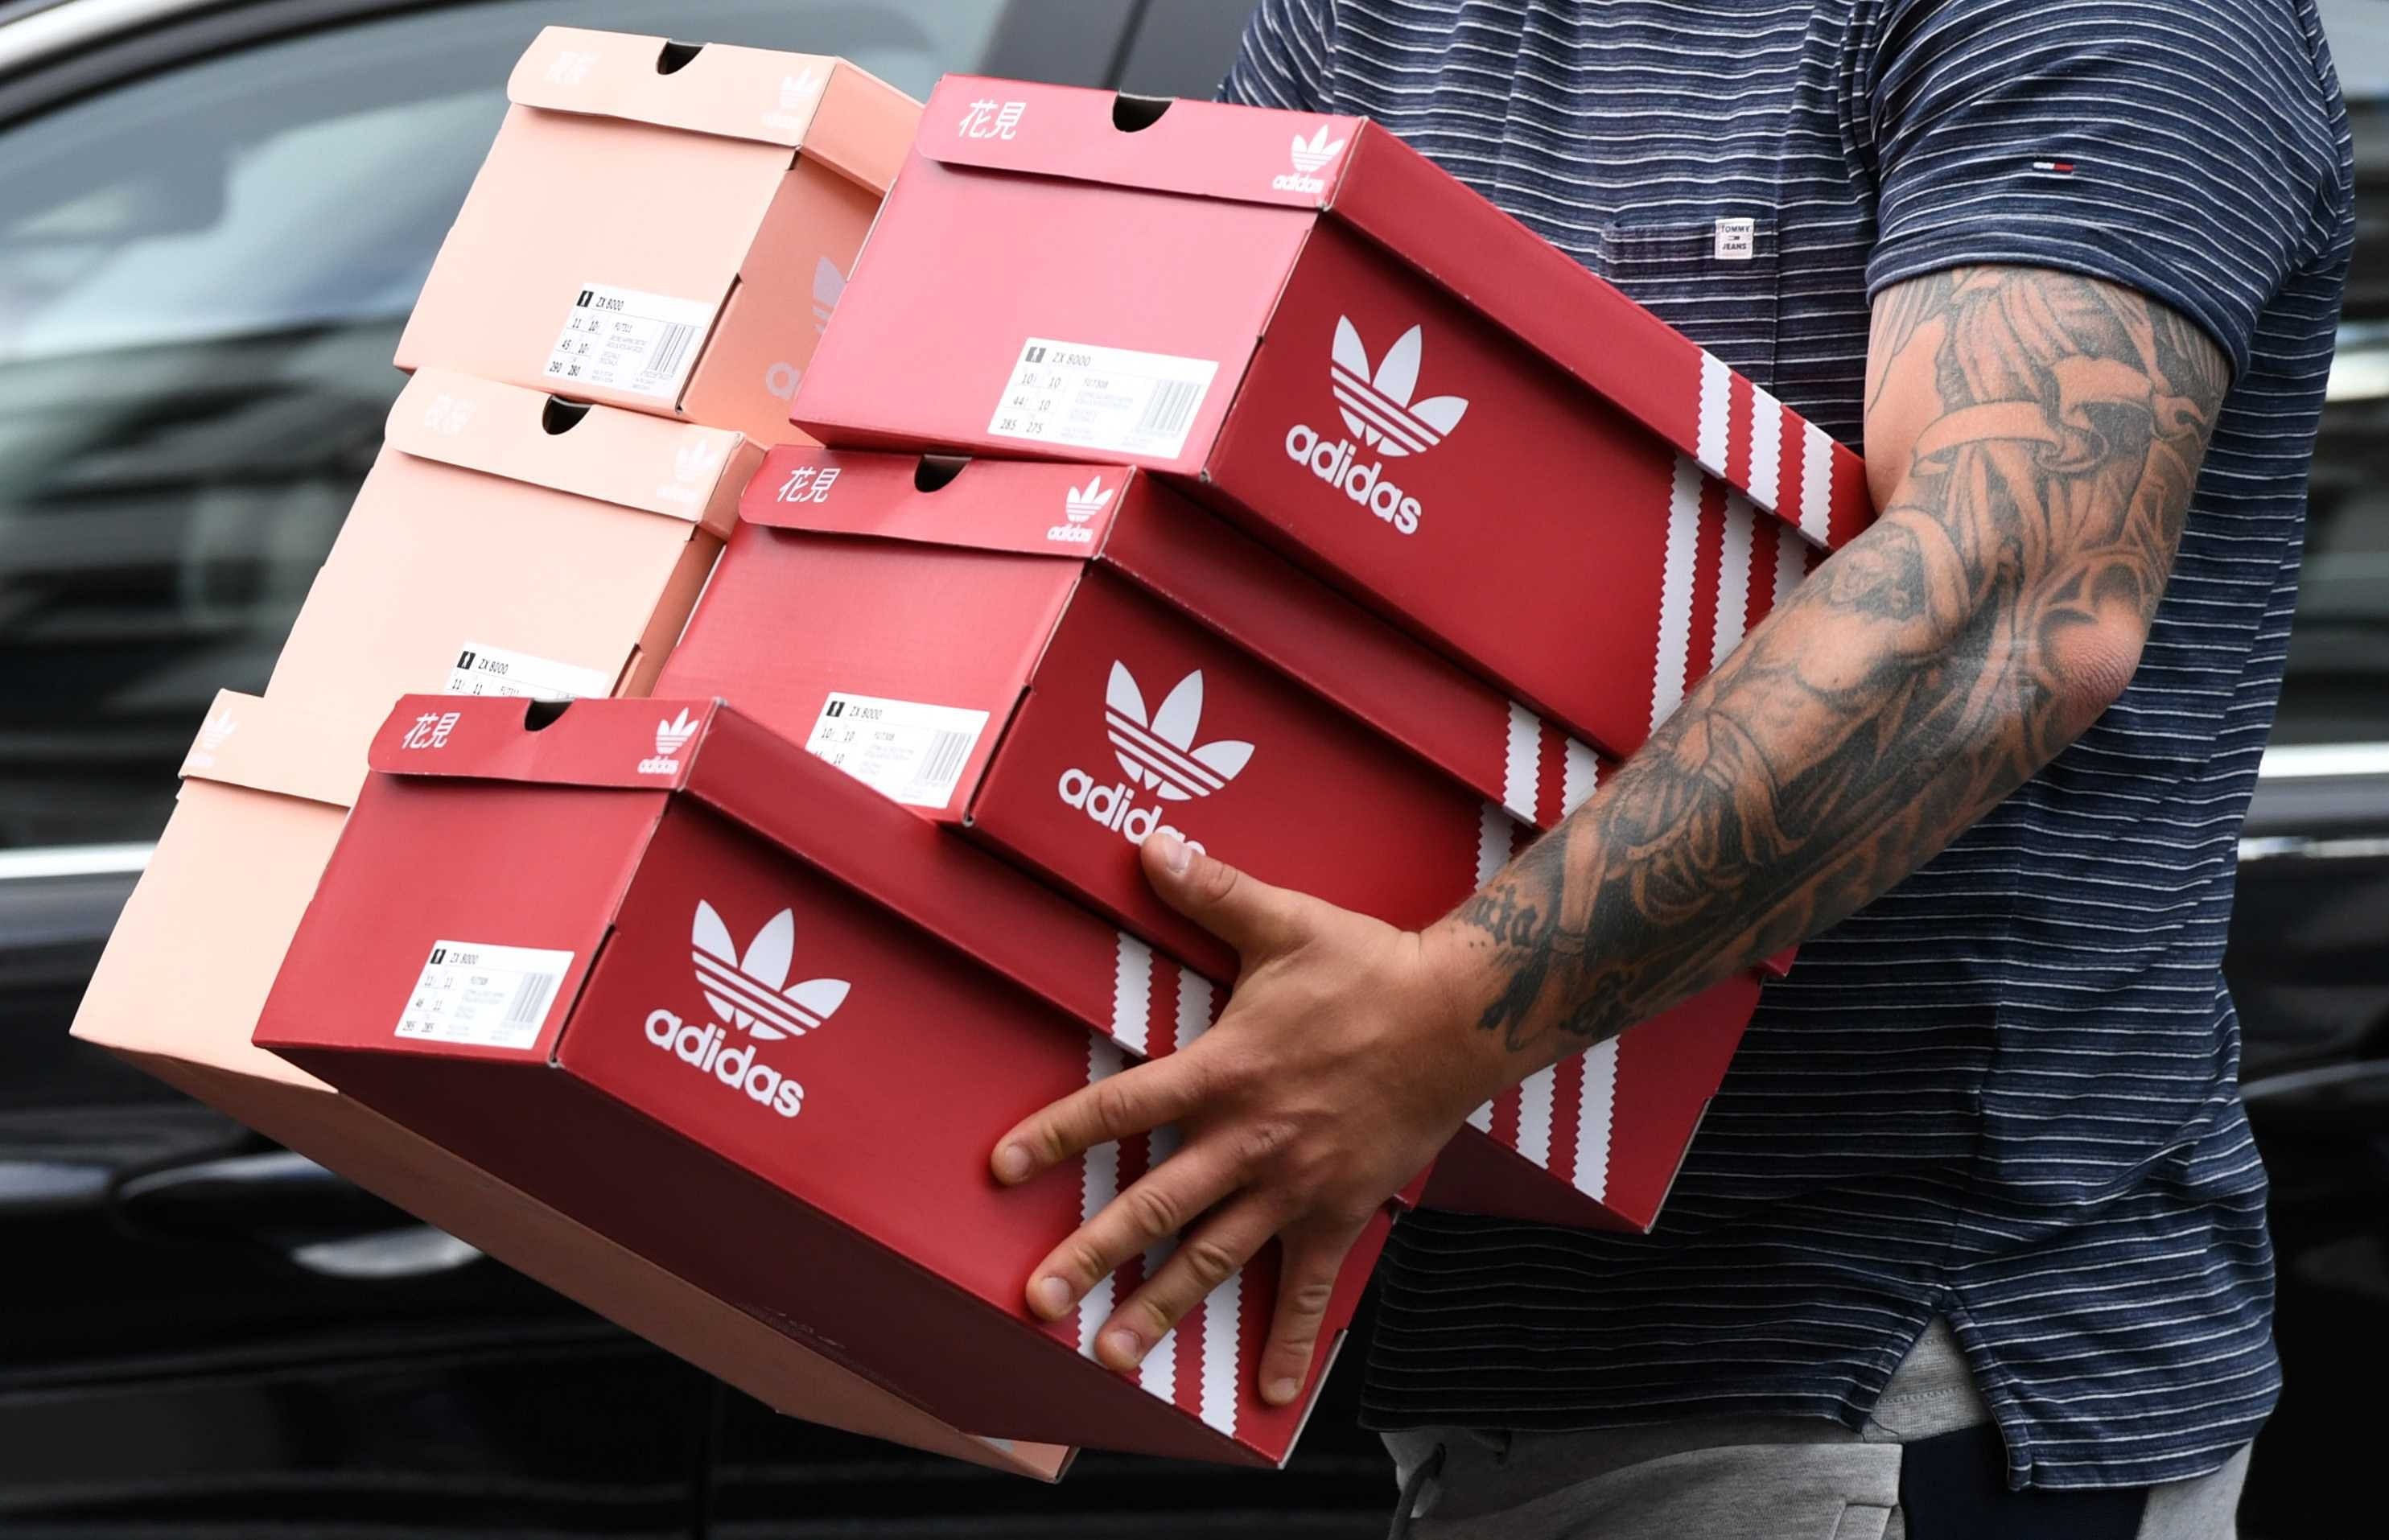 A man carries Adidas shoeboxes near the Adidas store, as the spread of the coronavirus disease (COVID-19) continues, in Berlin, Germany (Credit: Reuters)